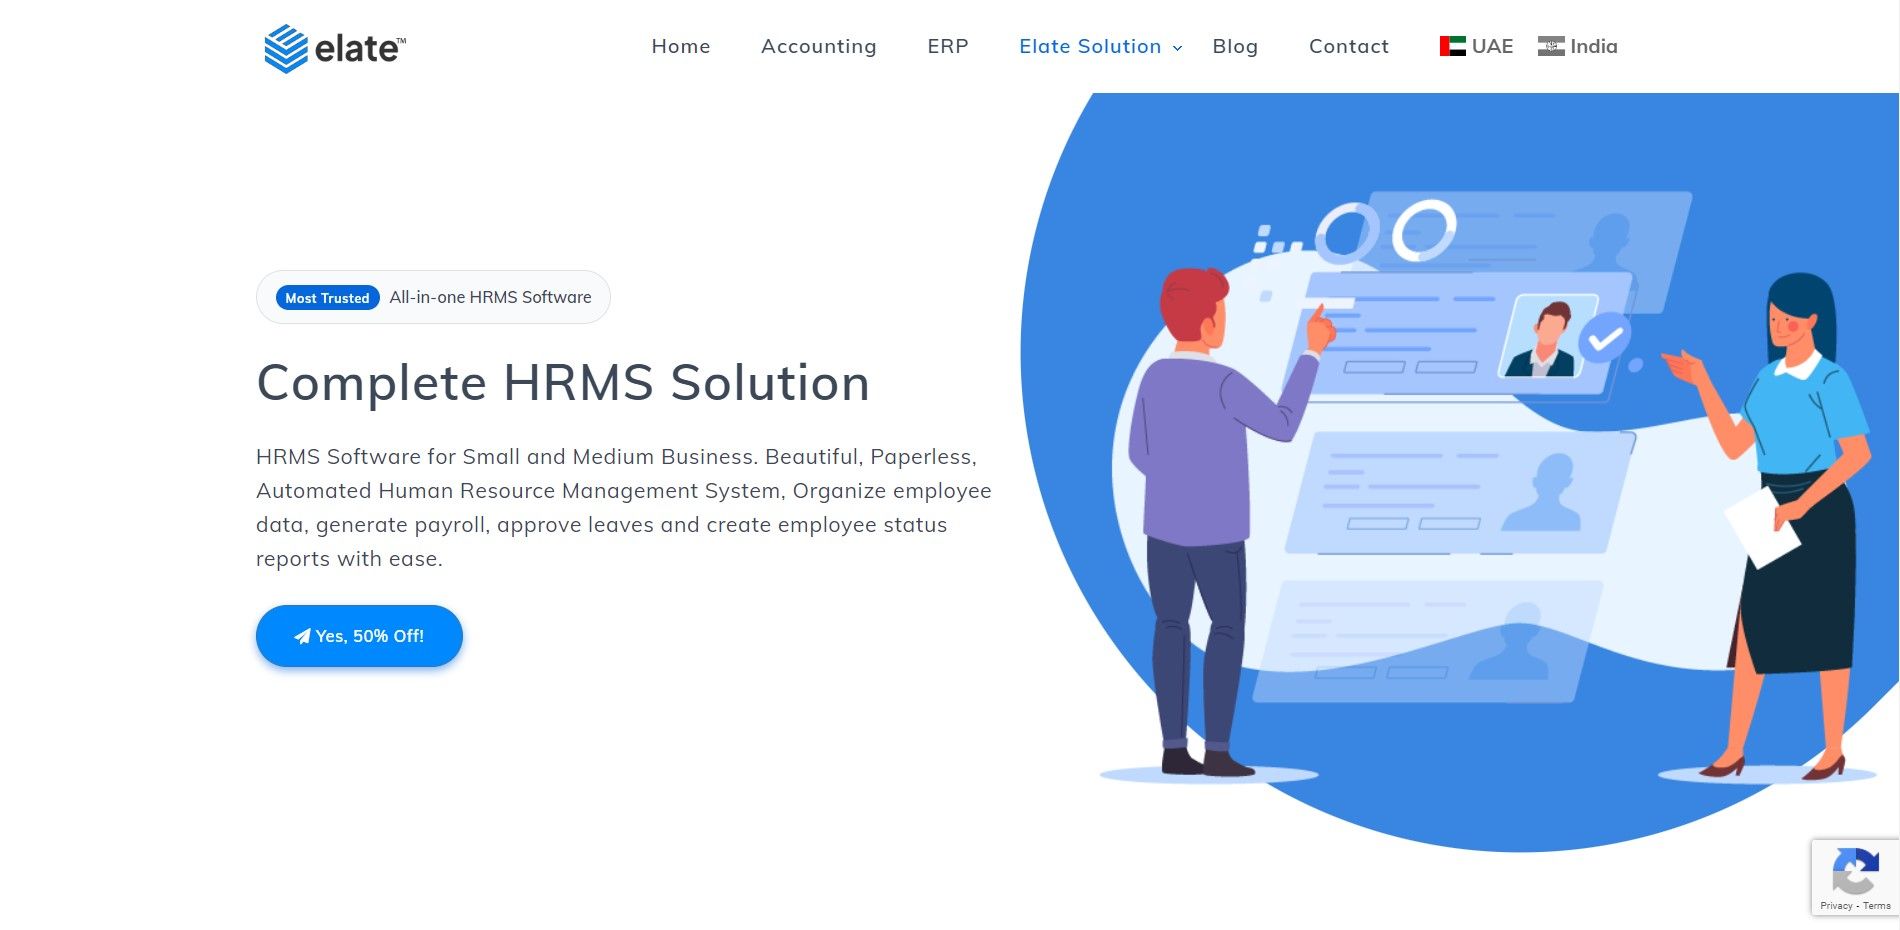 An image of Elate HRMS mentioning it is a complete HRMS solution